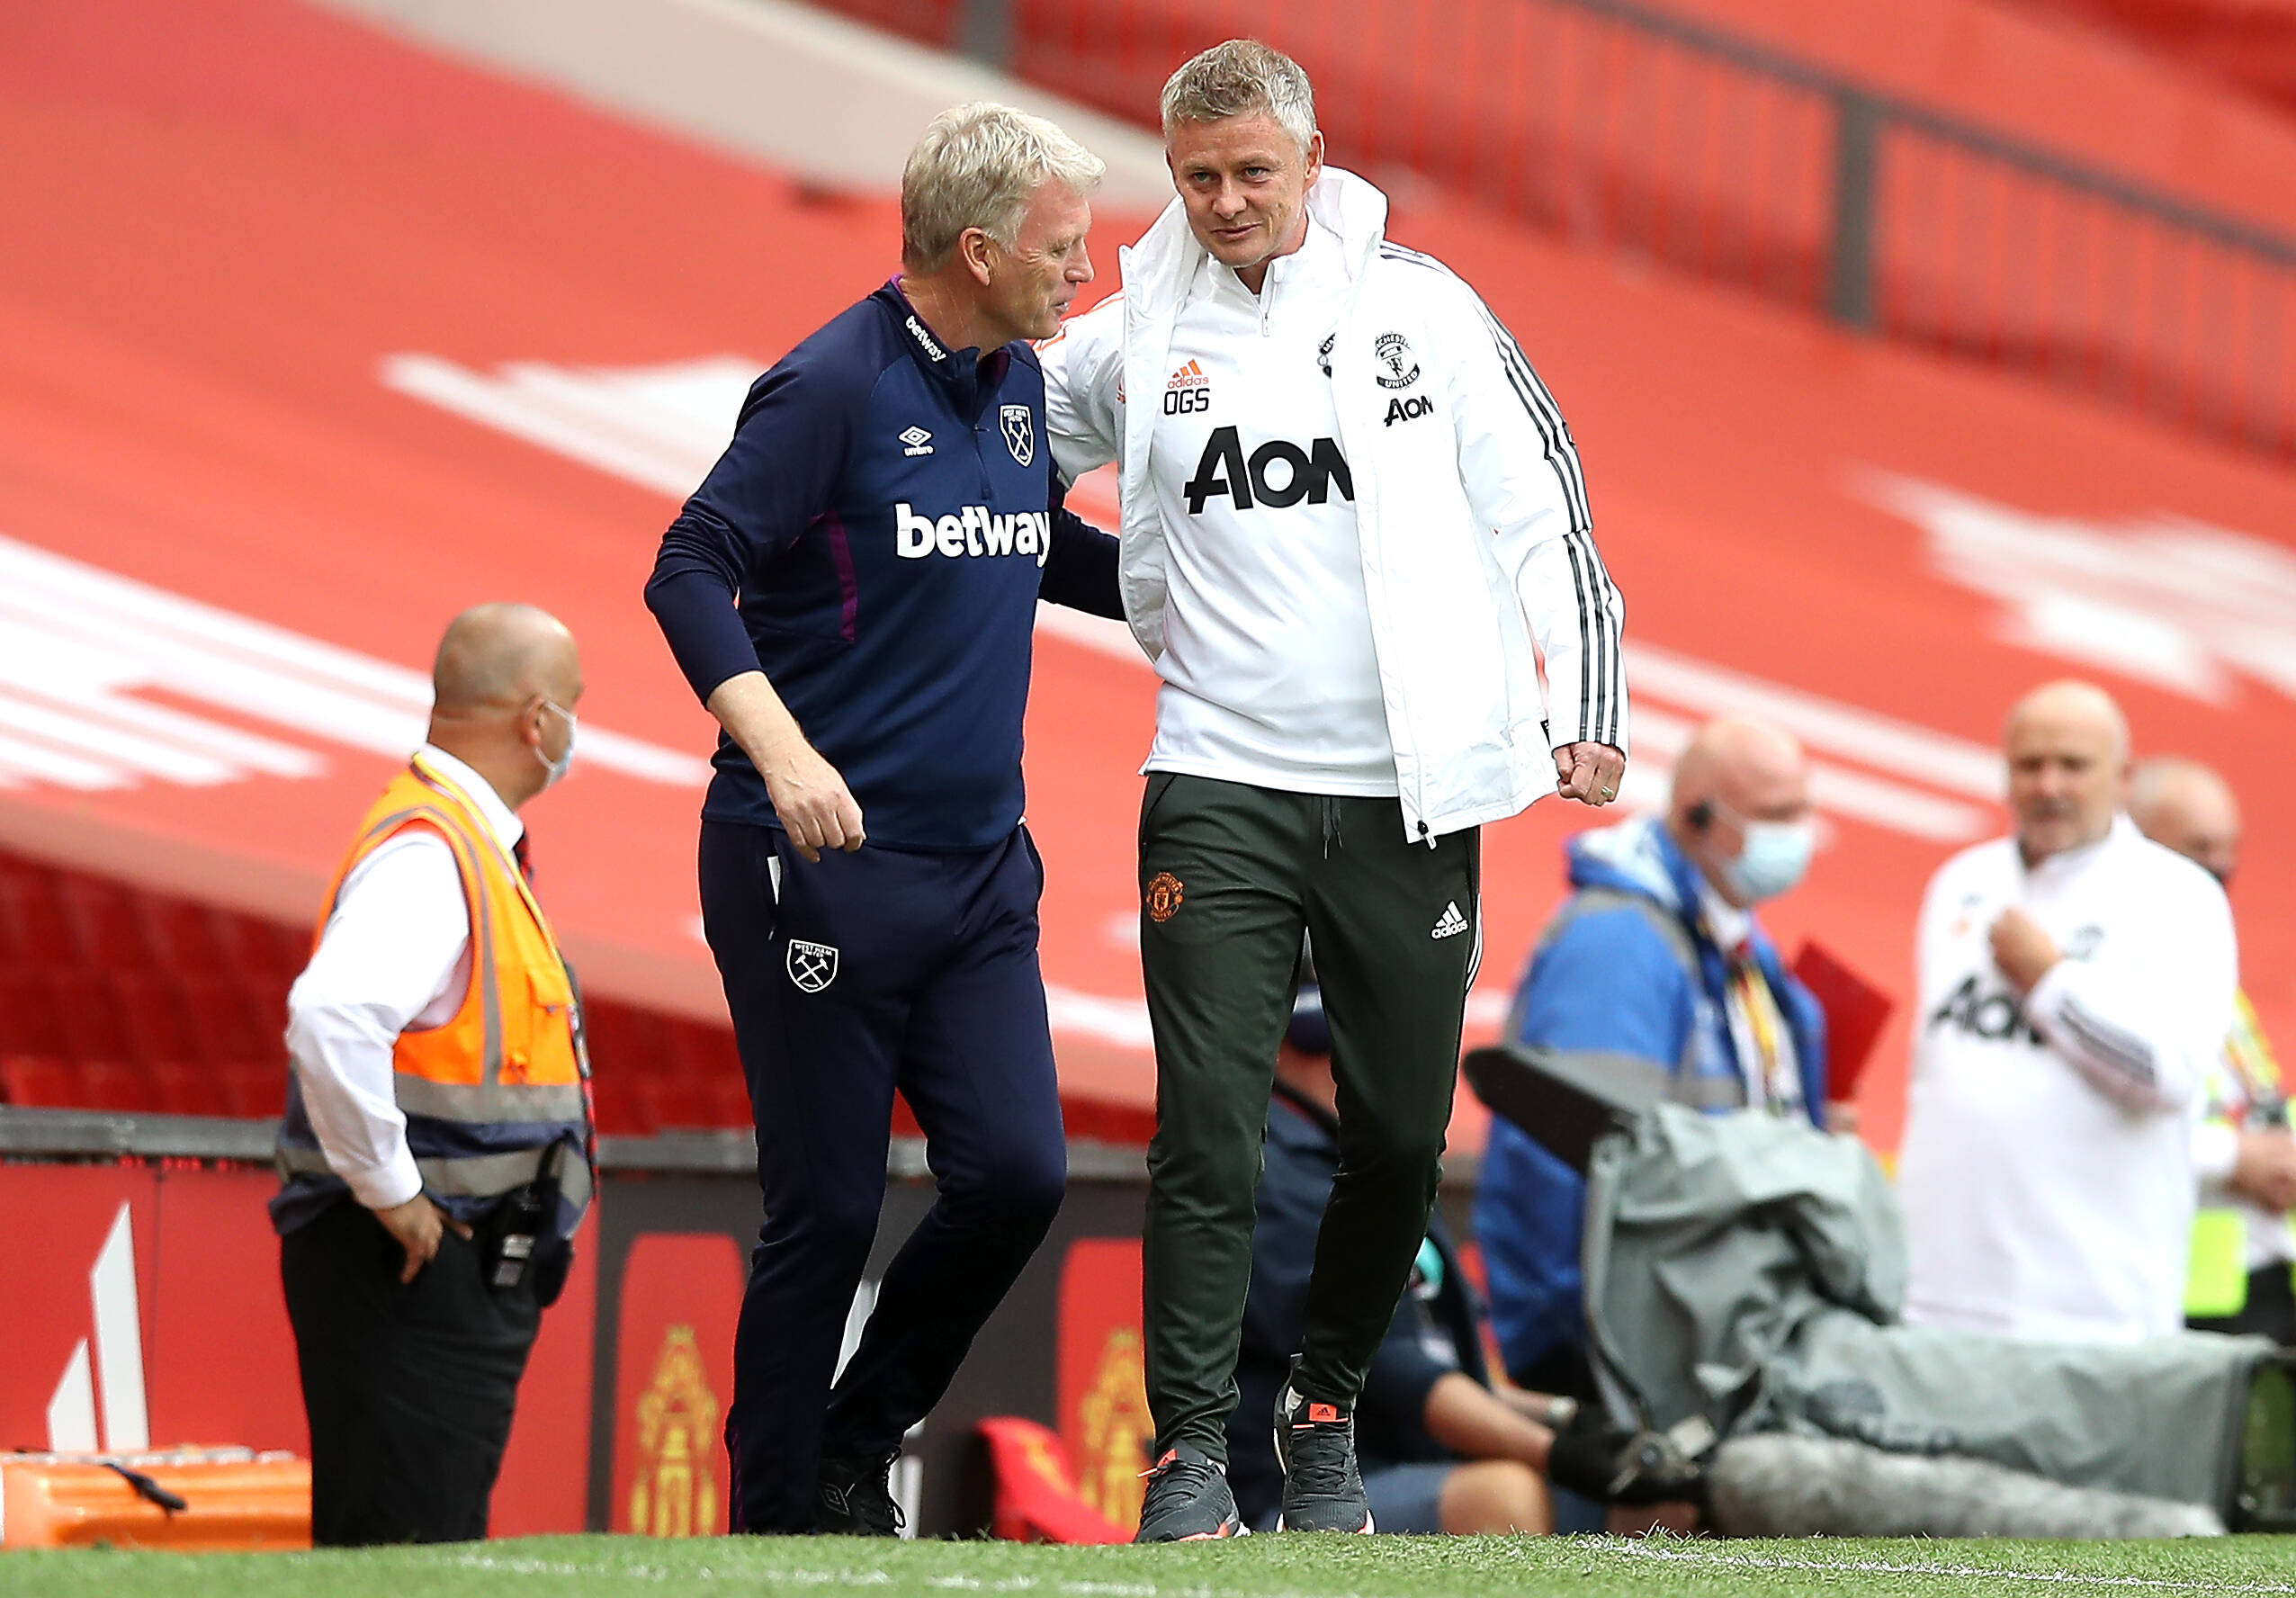 Manchester United Vs West Ham United Preview (David Moyes and Ole Gunnar Solskjaer can be seen in the picture)